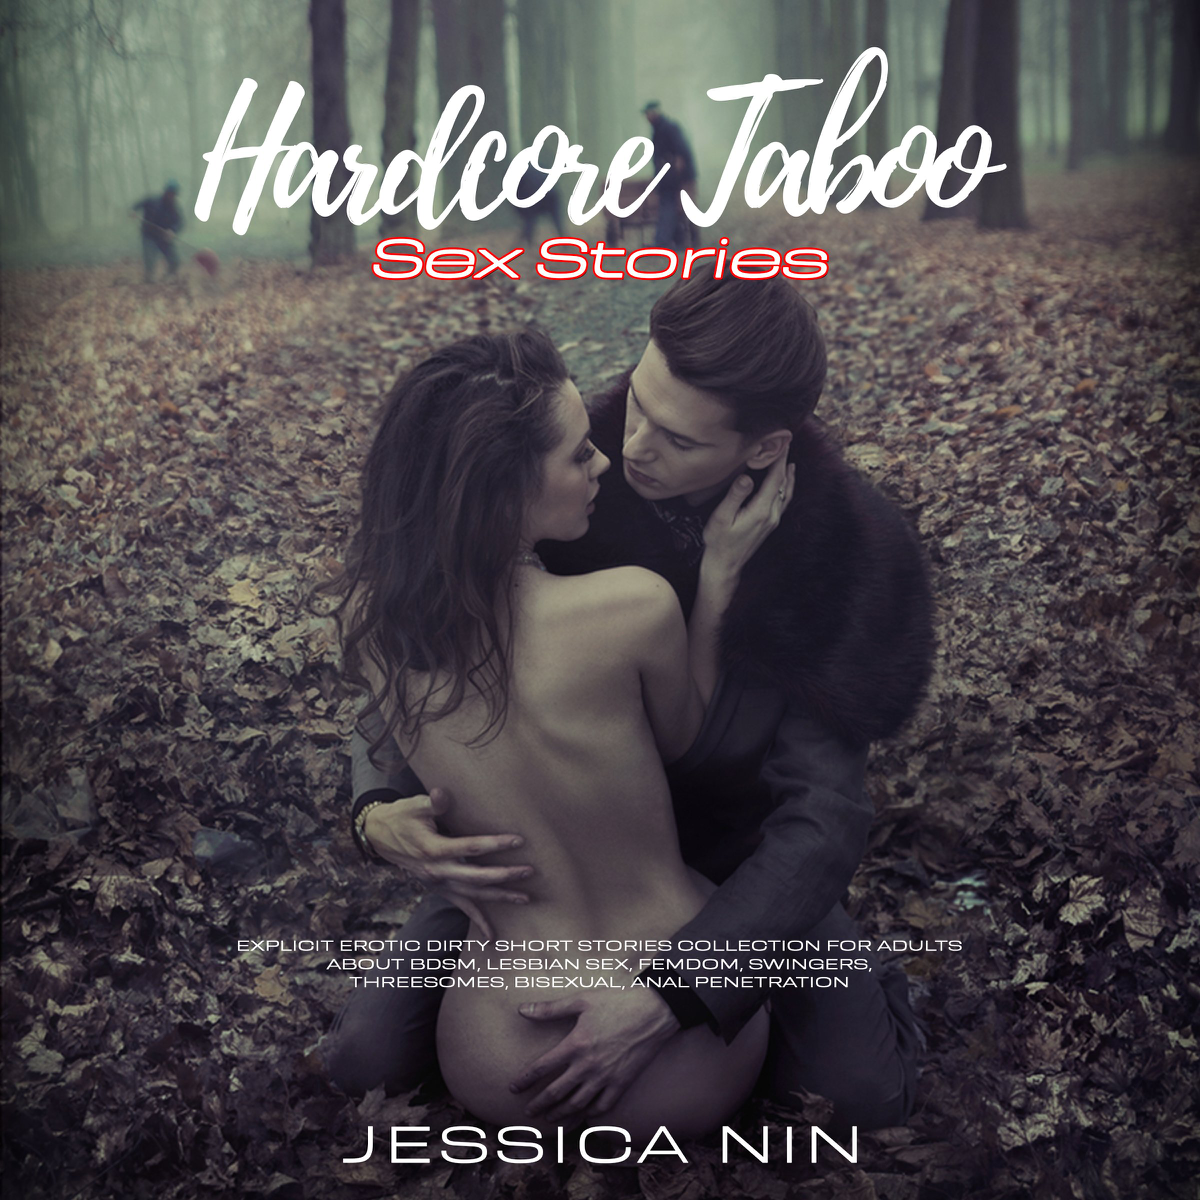 Hardcore Taboo Sex Stories Explicit Erotic Dirty Short Stories Collection For Adults About Bdsm, Lesbian sex, Femdom, Swingers, Threesomes, Bisexual, A**l Penetration - Audiobook picture photo